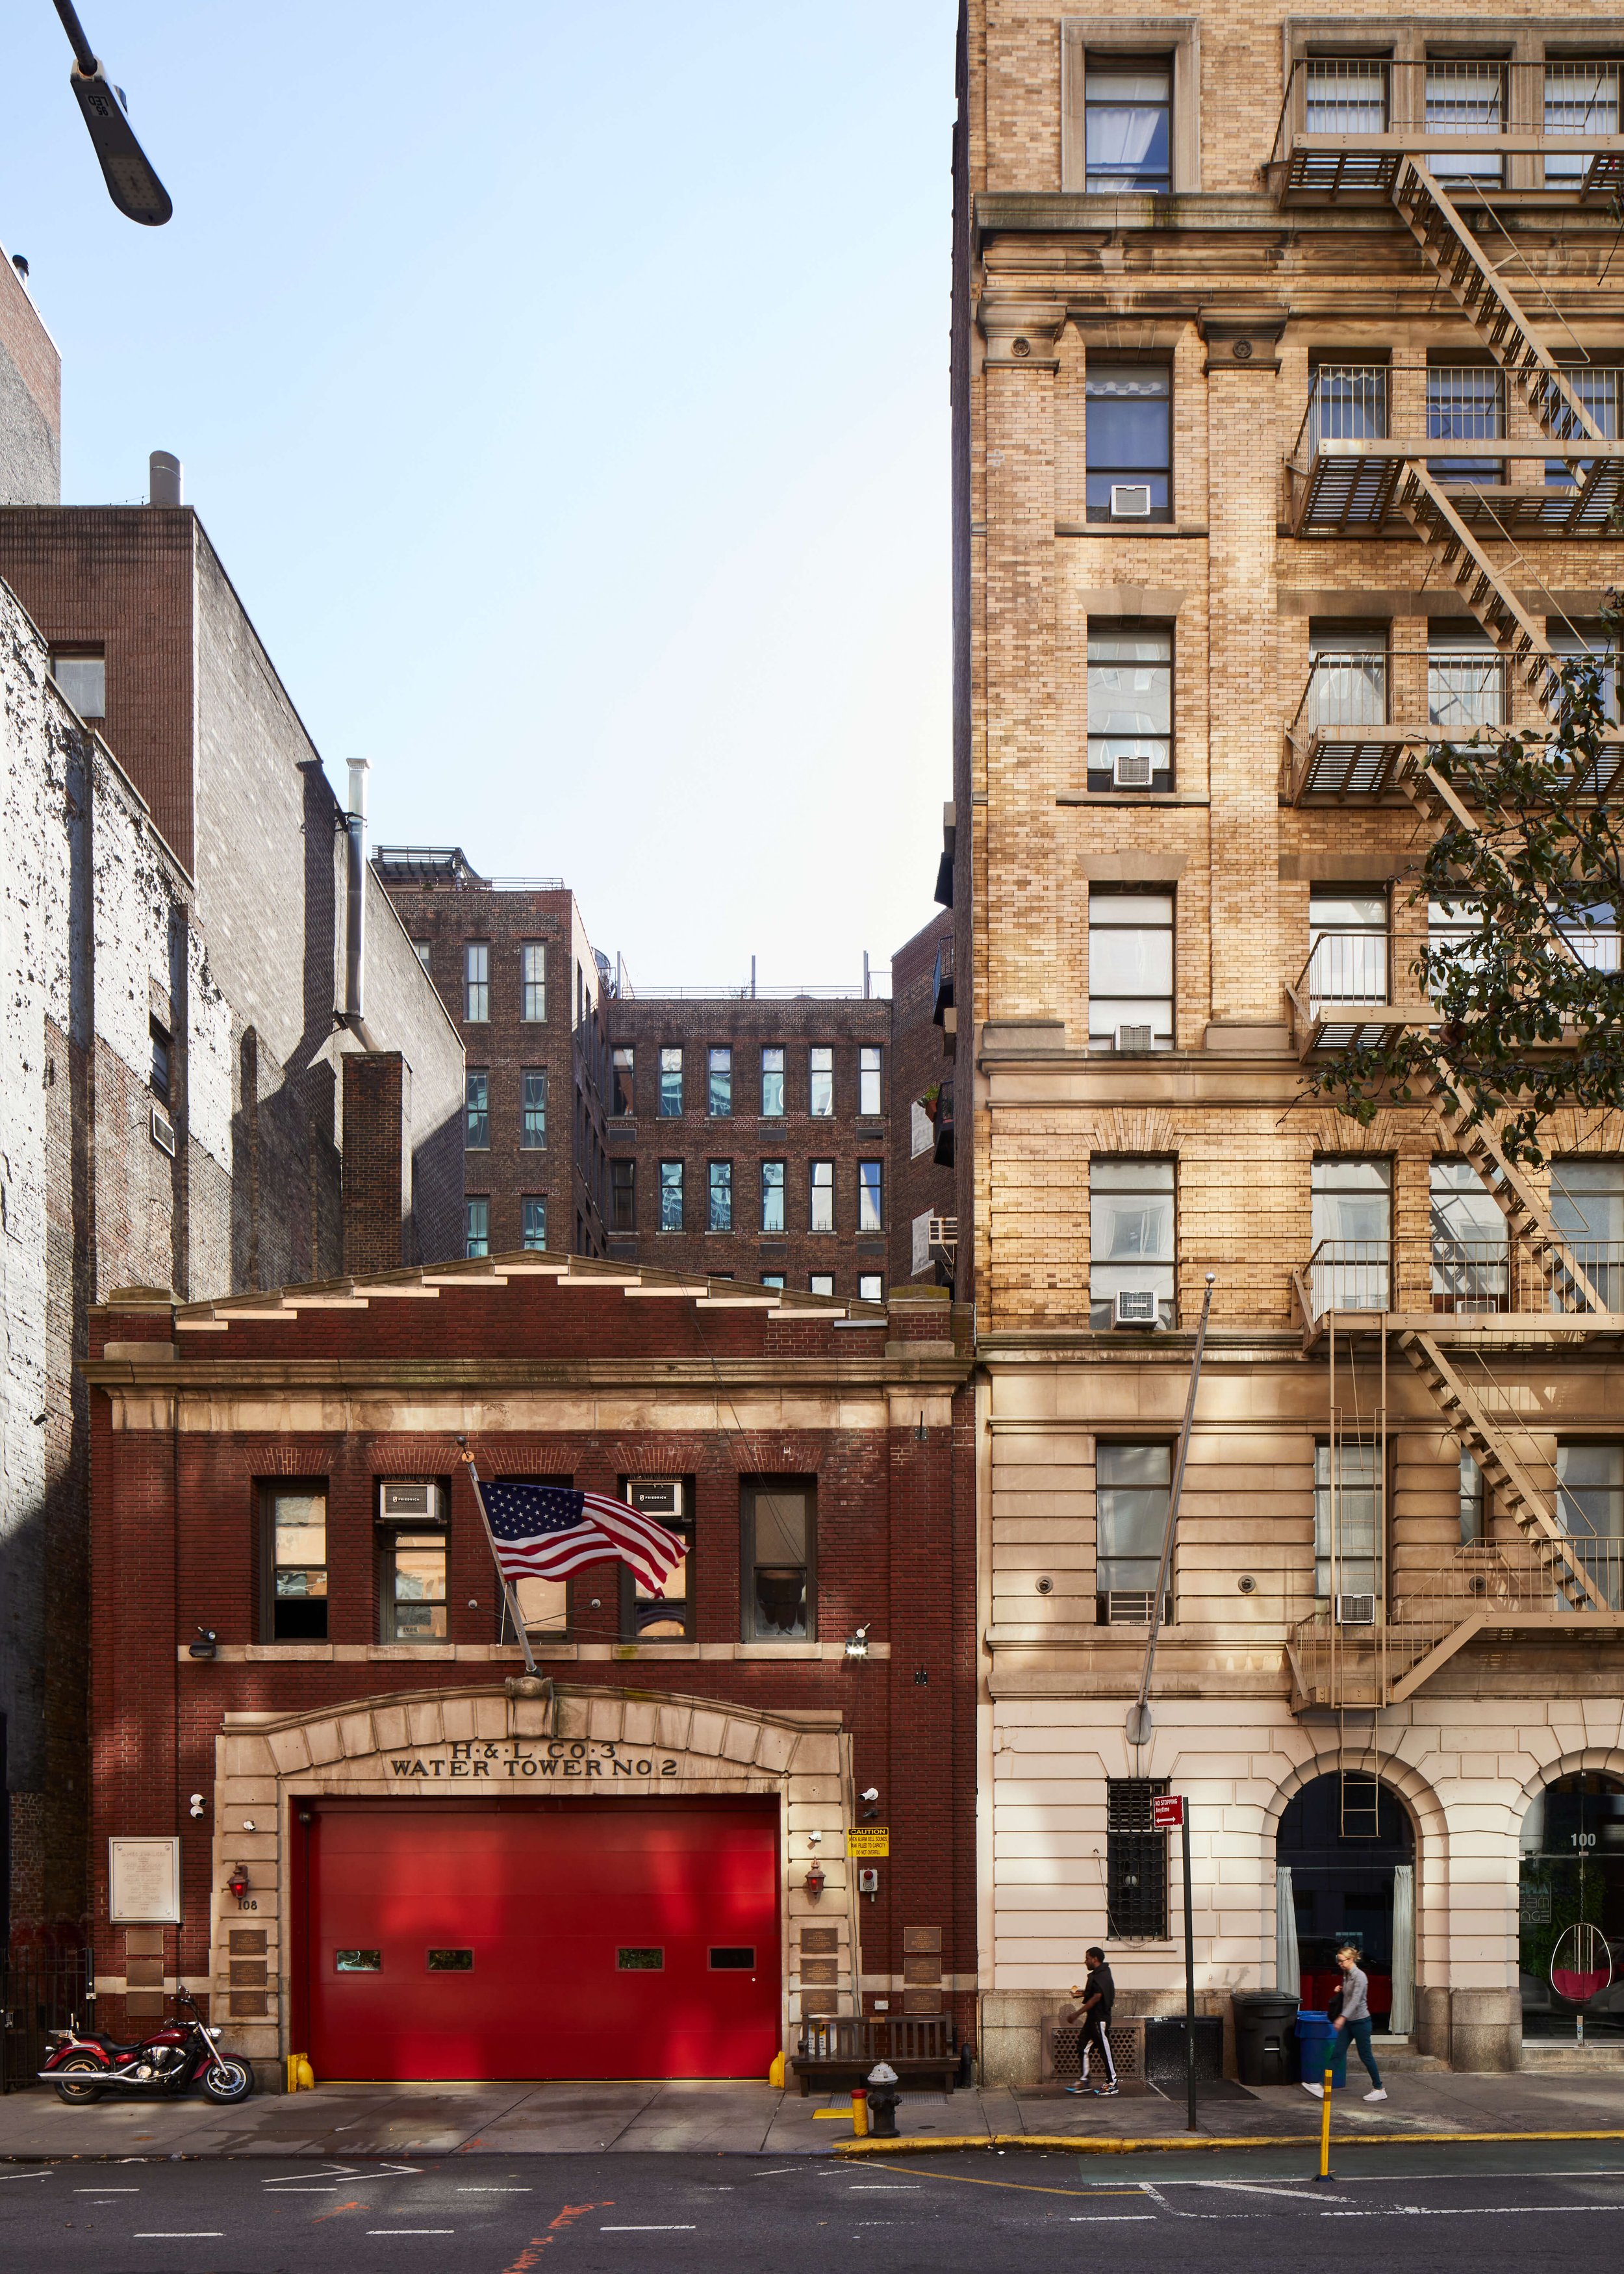  (l.) 106-108 East 13th Street is a 2-story firehouse constructed in 1928 for the NYFD (originally Hook &amp; Ladder Co. No. 3). Plaques on the exterior of the building attest that this house lost most of its men responding to the September 11th atta